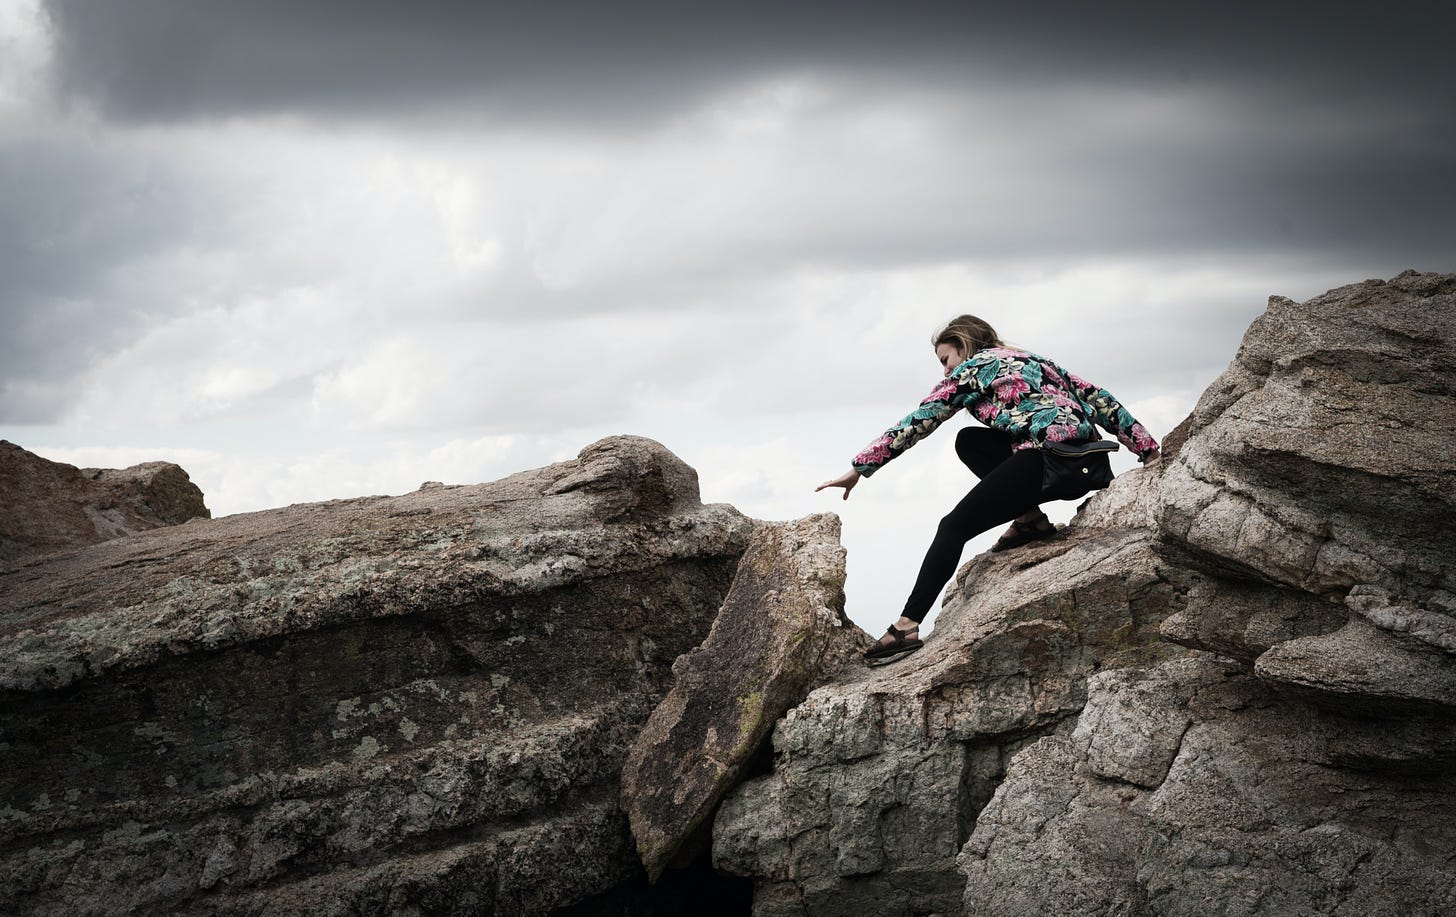 An individual in a floral sweater perched mid-climb on some rocks while reaching towards another section of rock before moving forward. Cloudy skies behind.